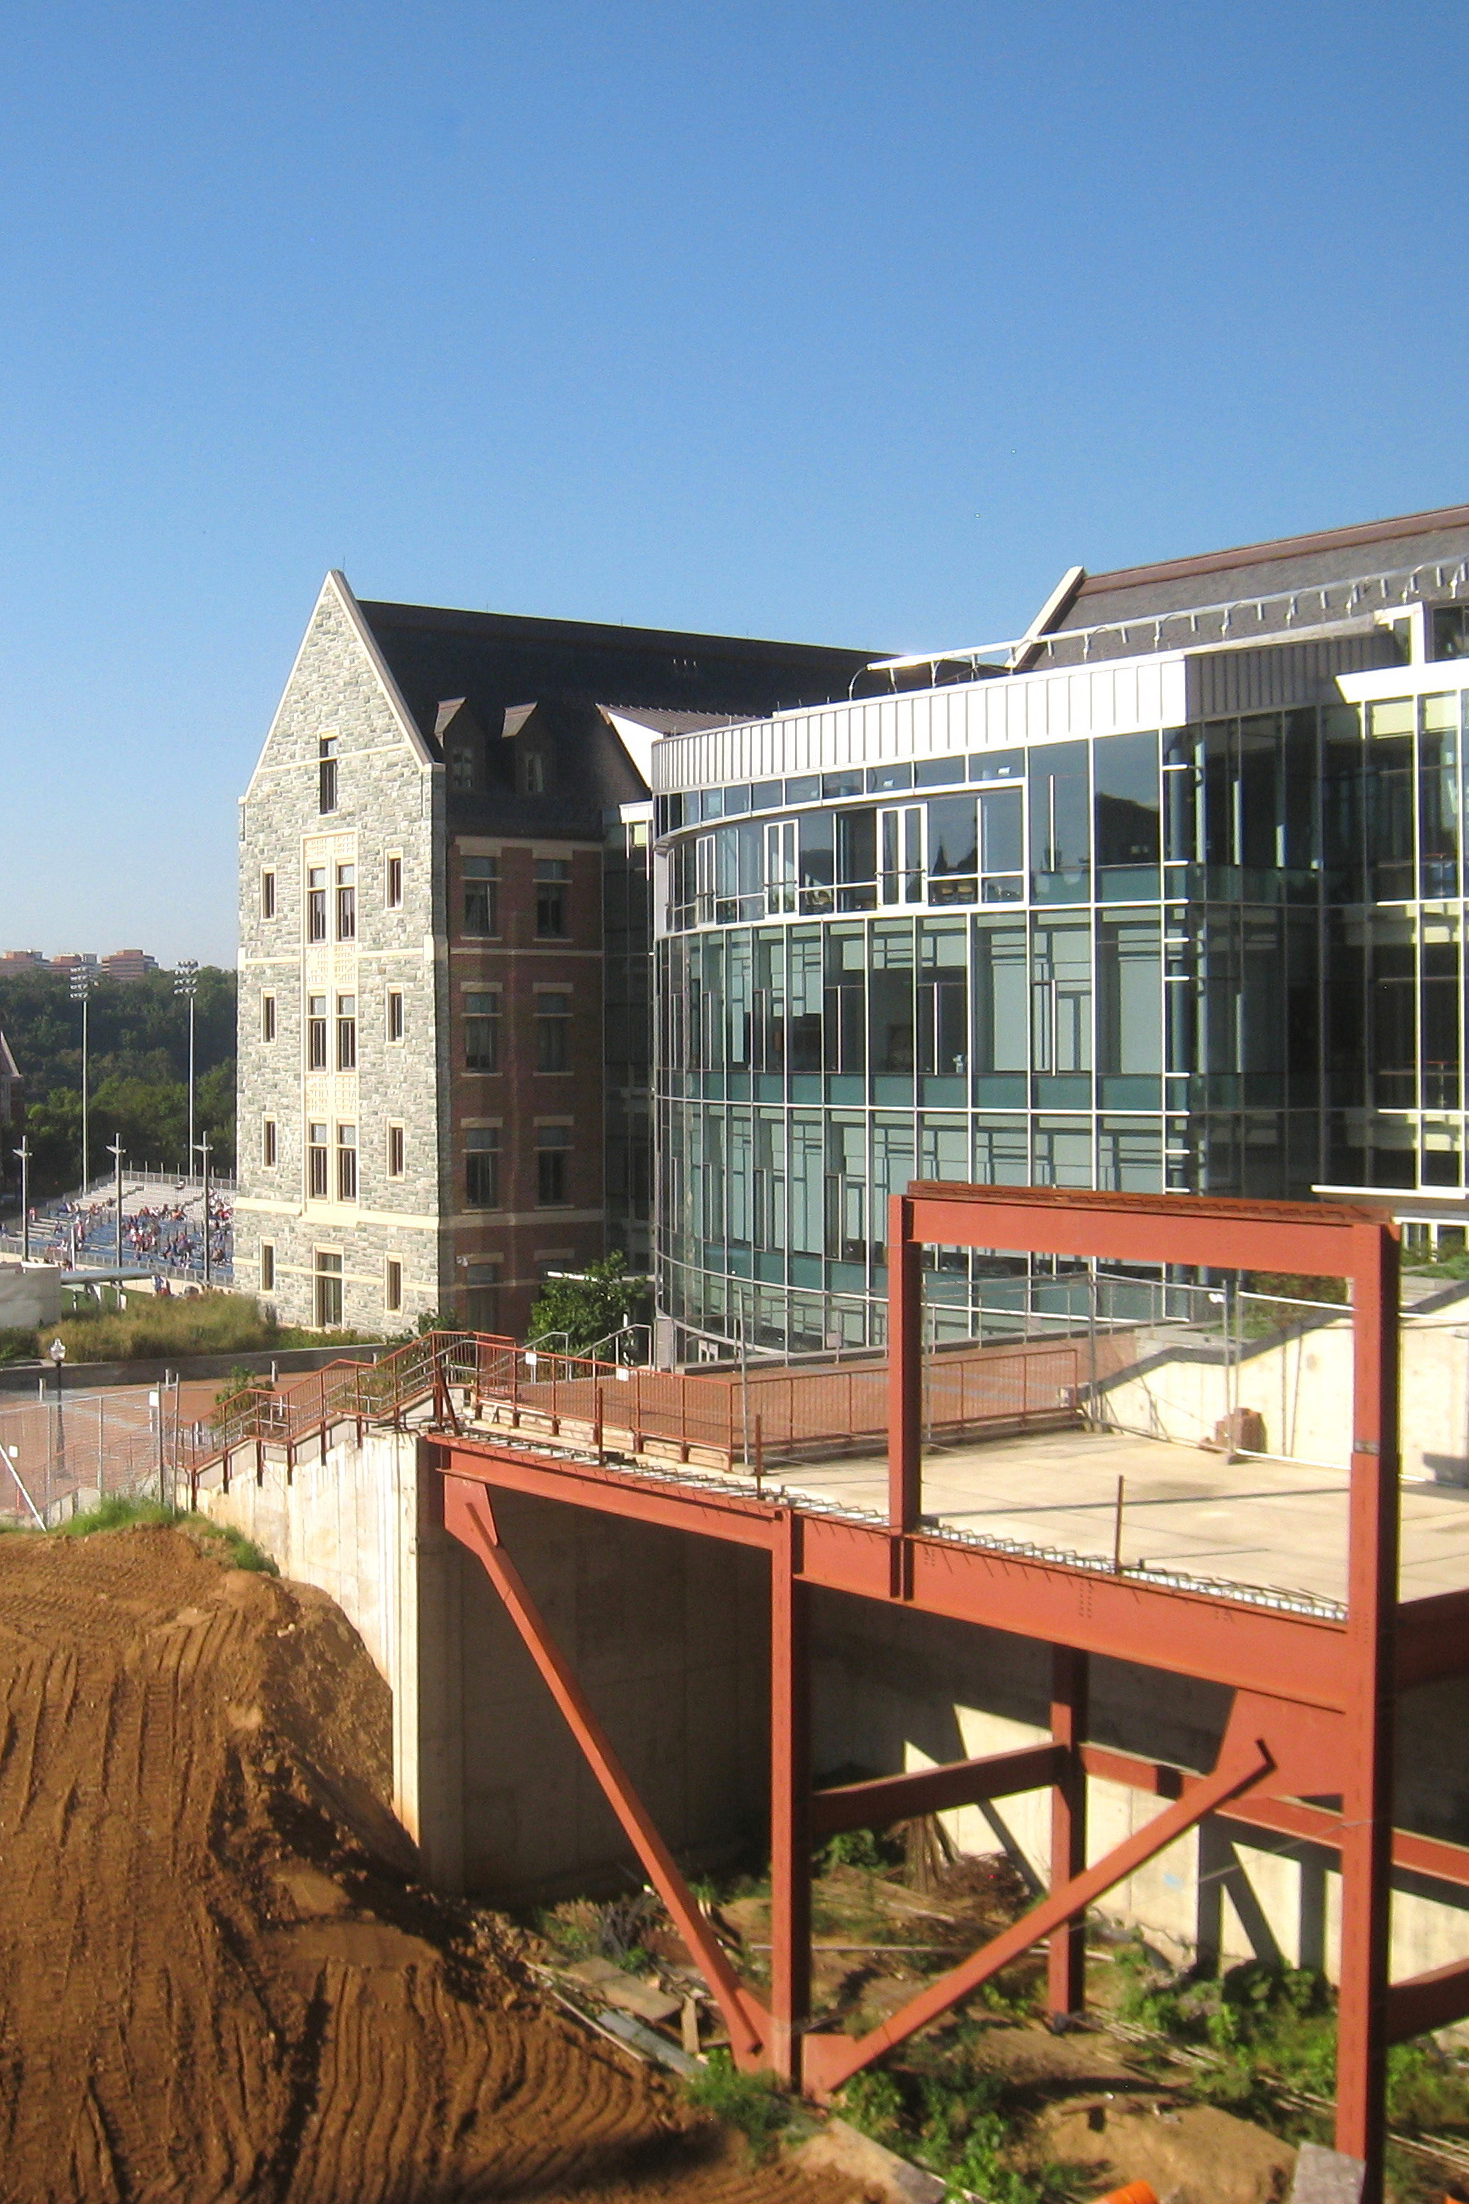 A construction site is set up in front of a building made of stone masonry and a second building with glass walls. 